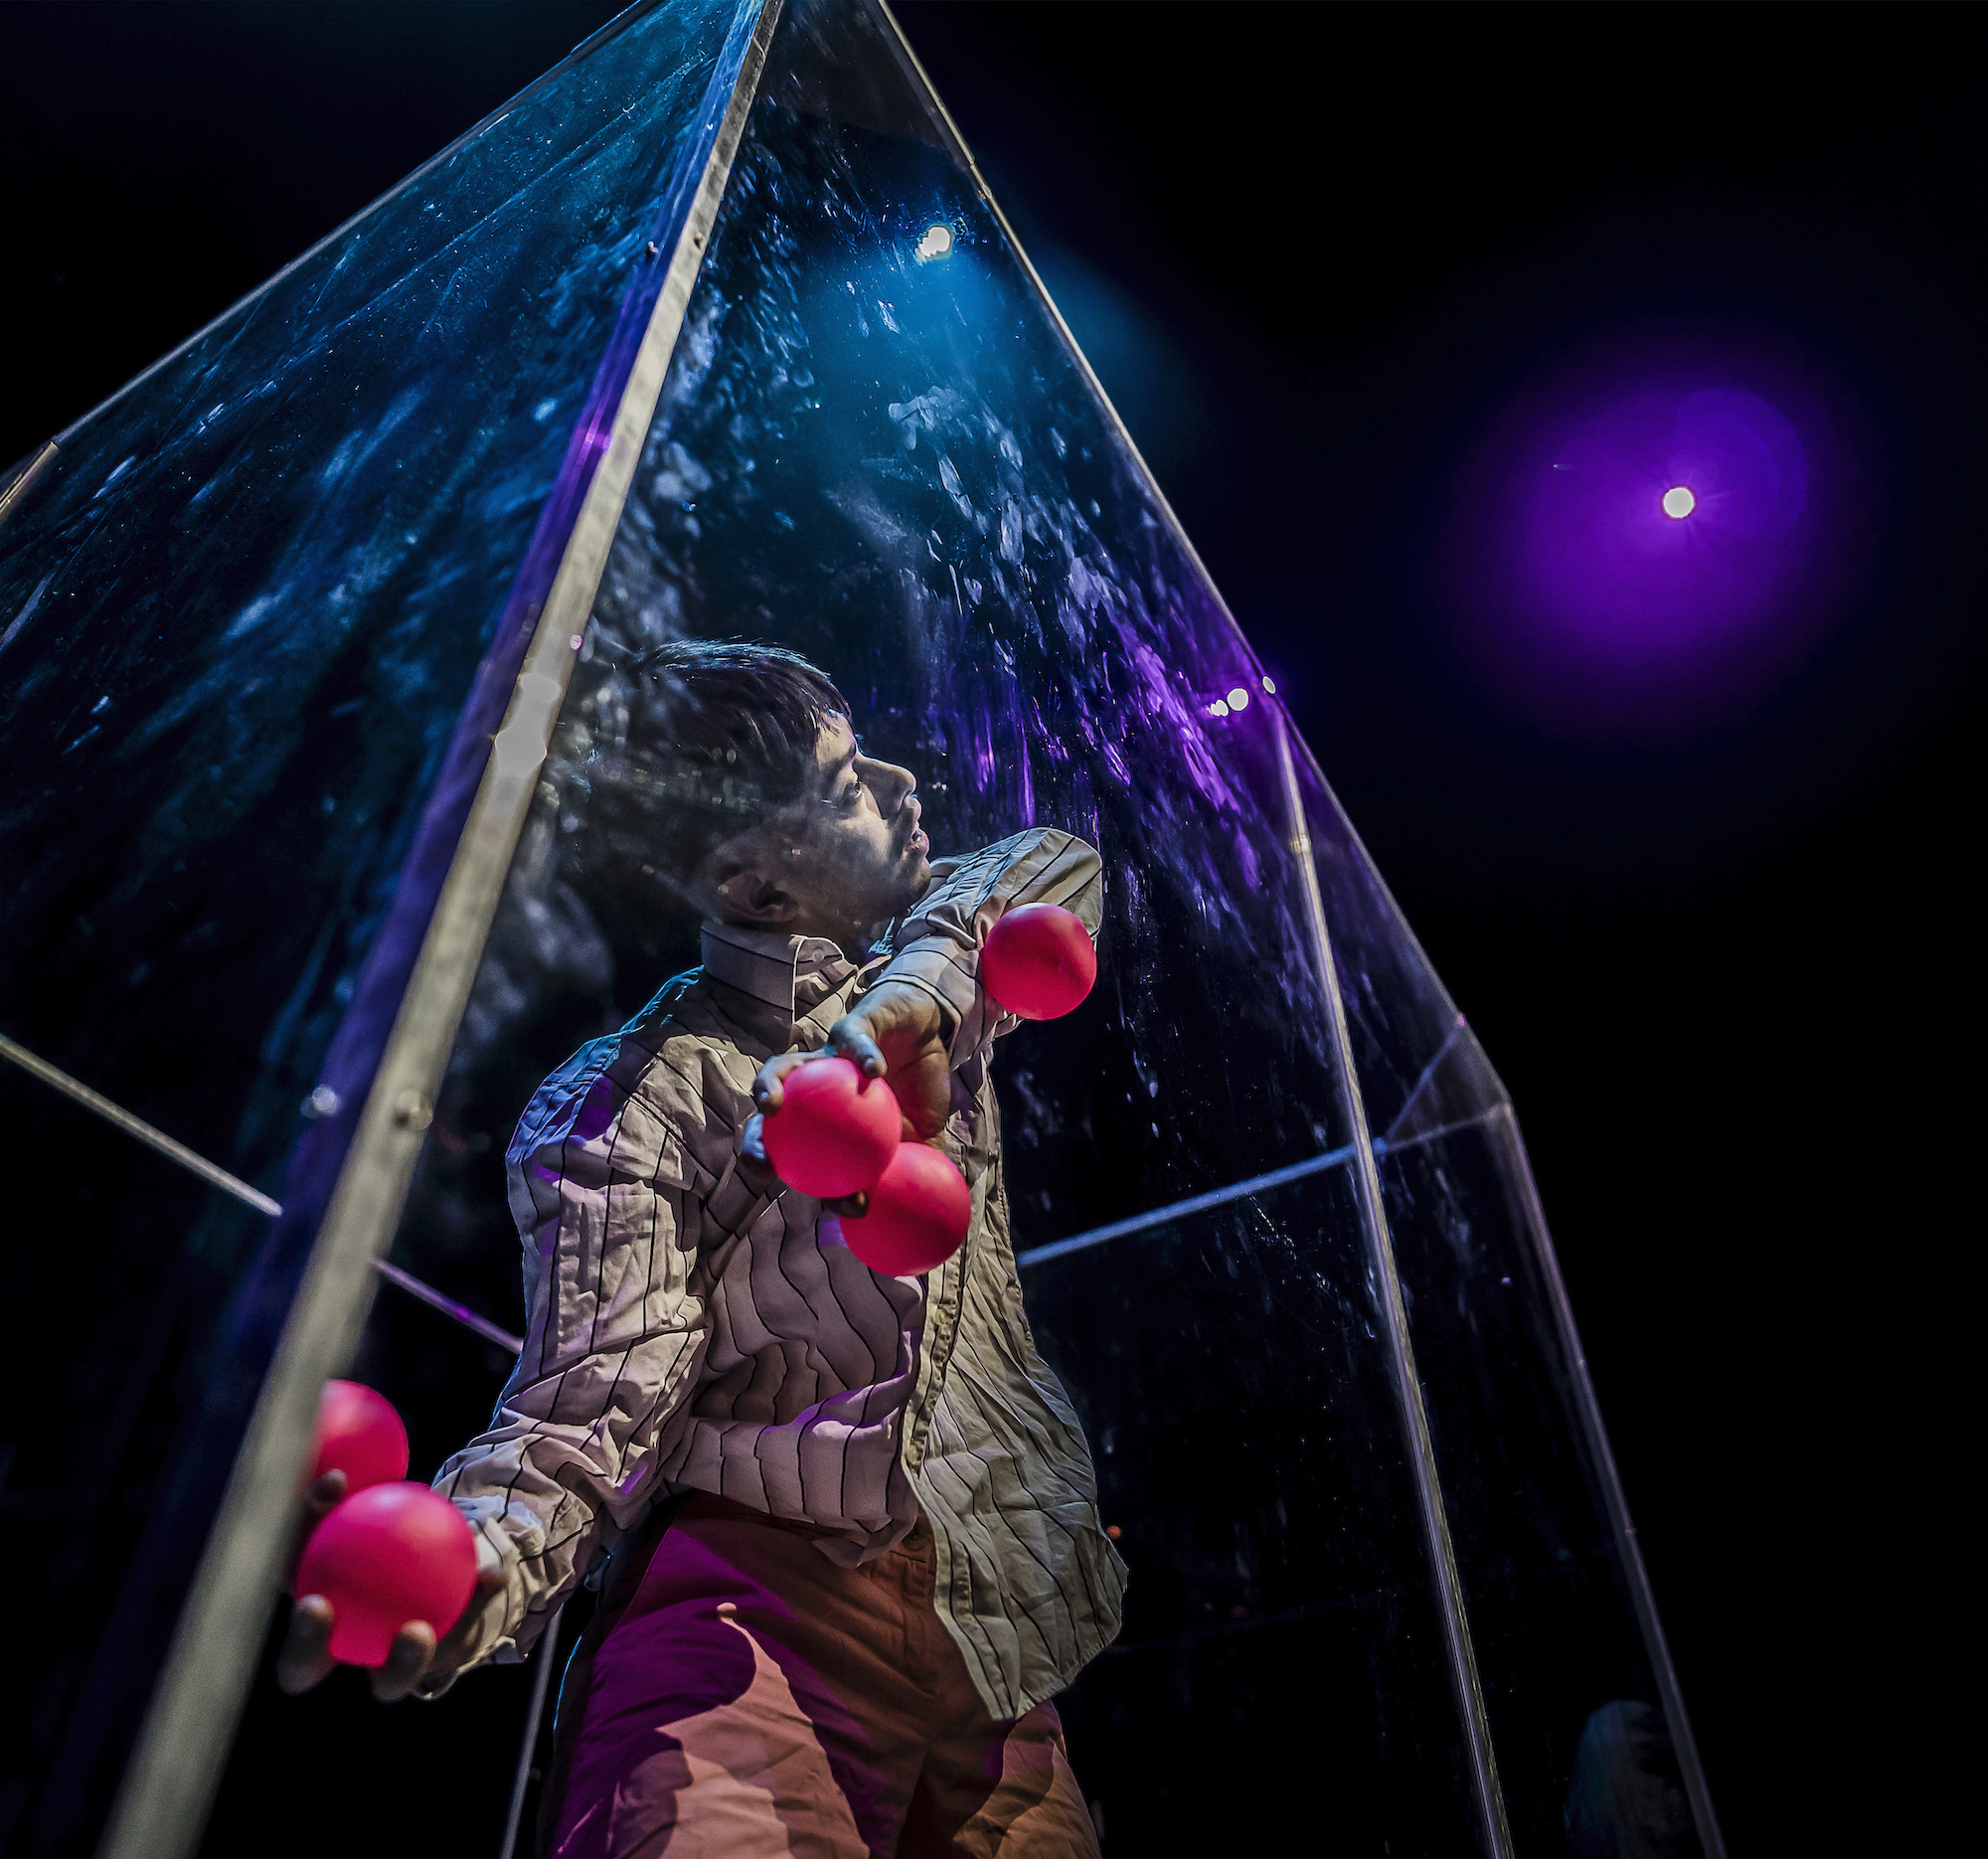 Gaby Merz photograph of juggler Alonso Gonzalez Barria at the FIRCO festival